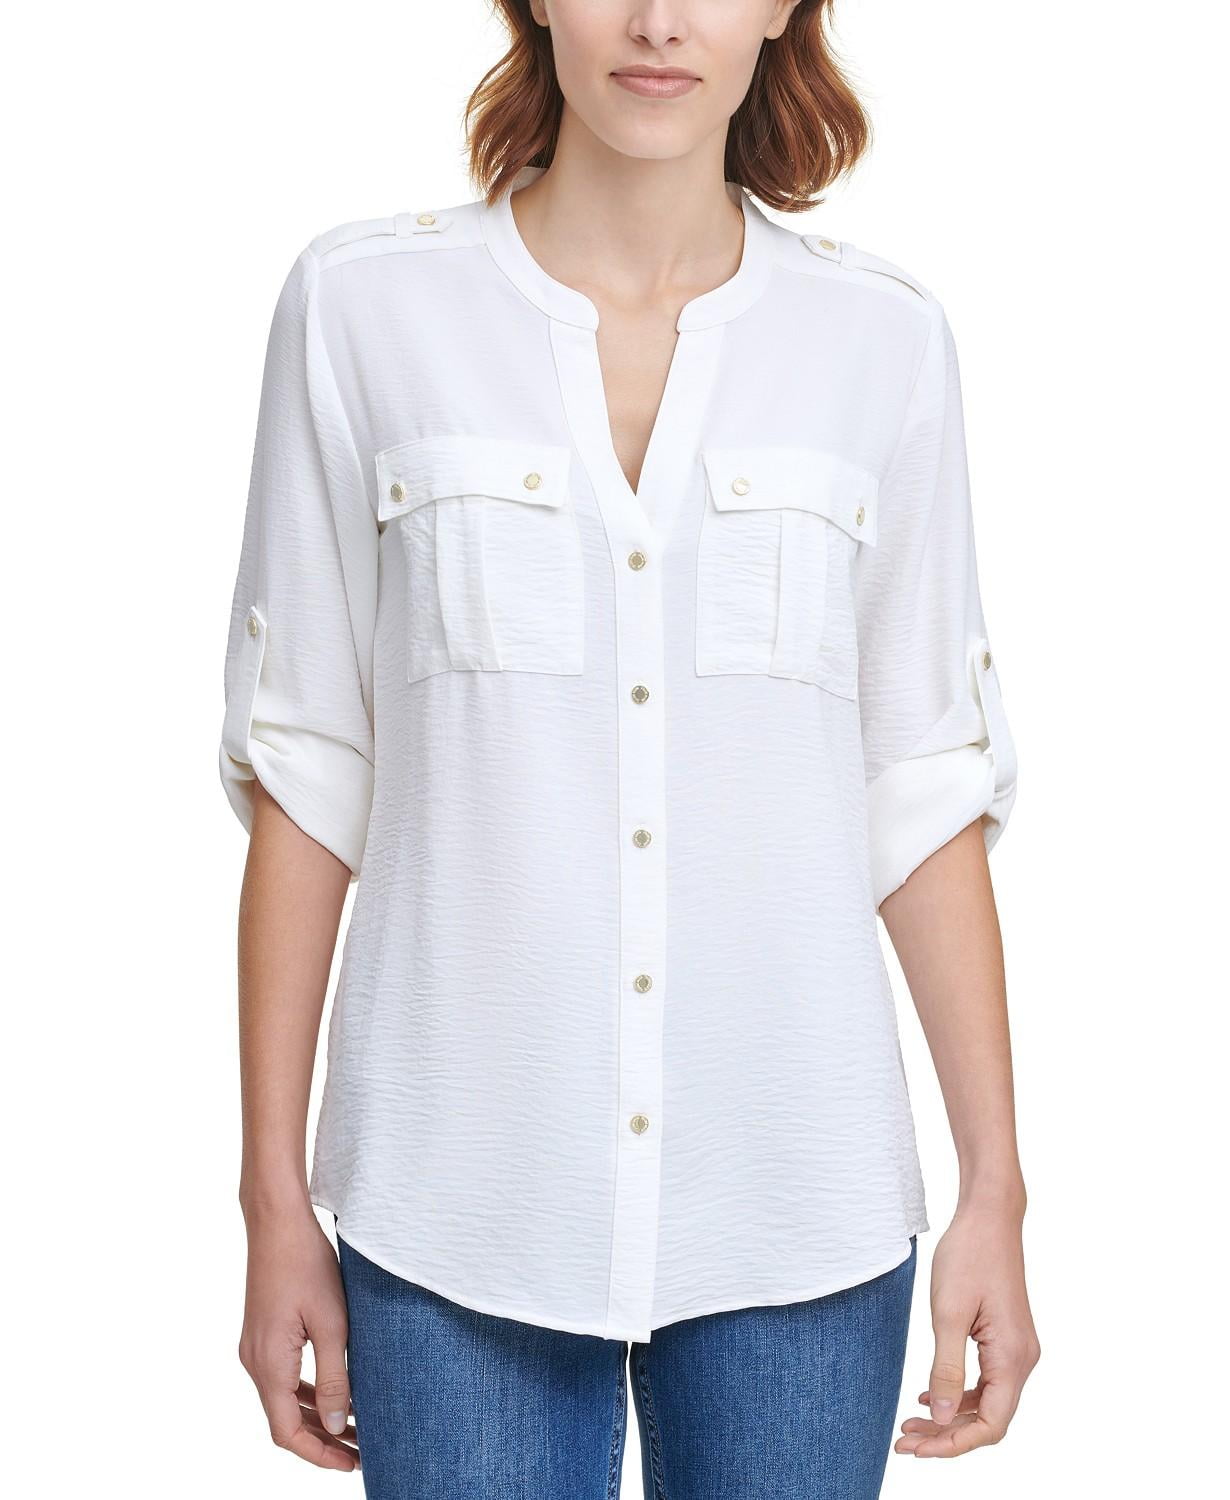 Womens Textured Roll Tab Button Down Shirt, White, Size Large